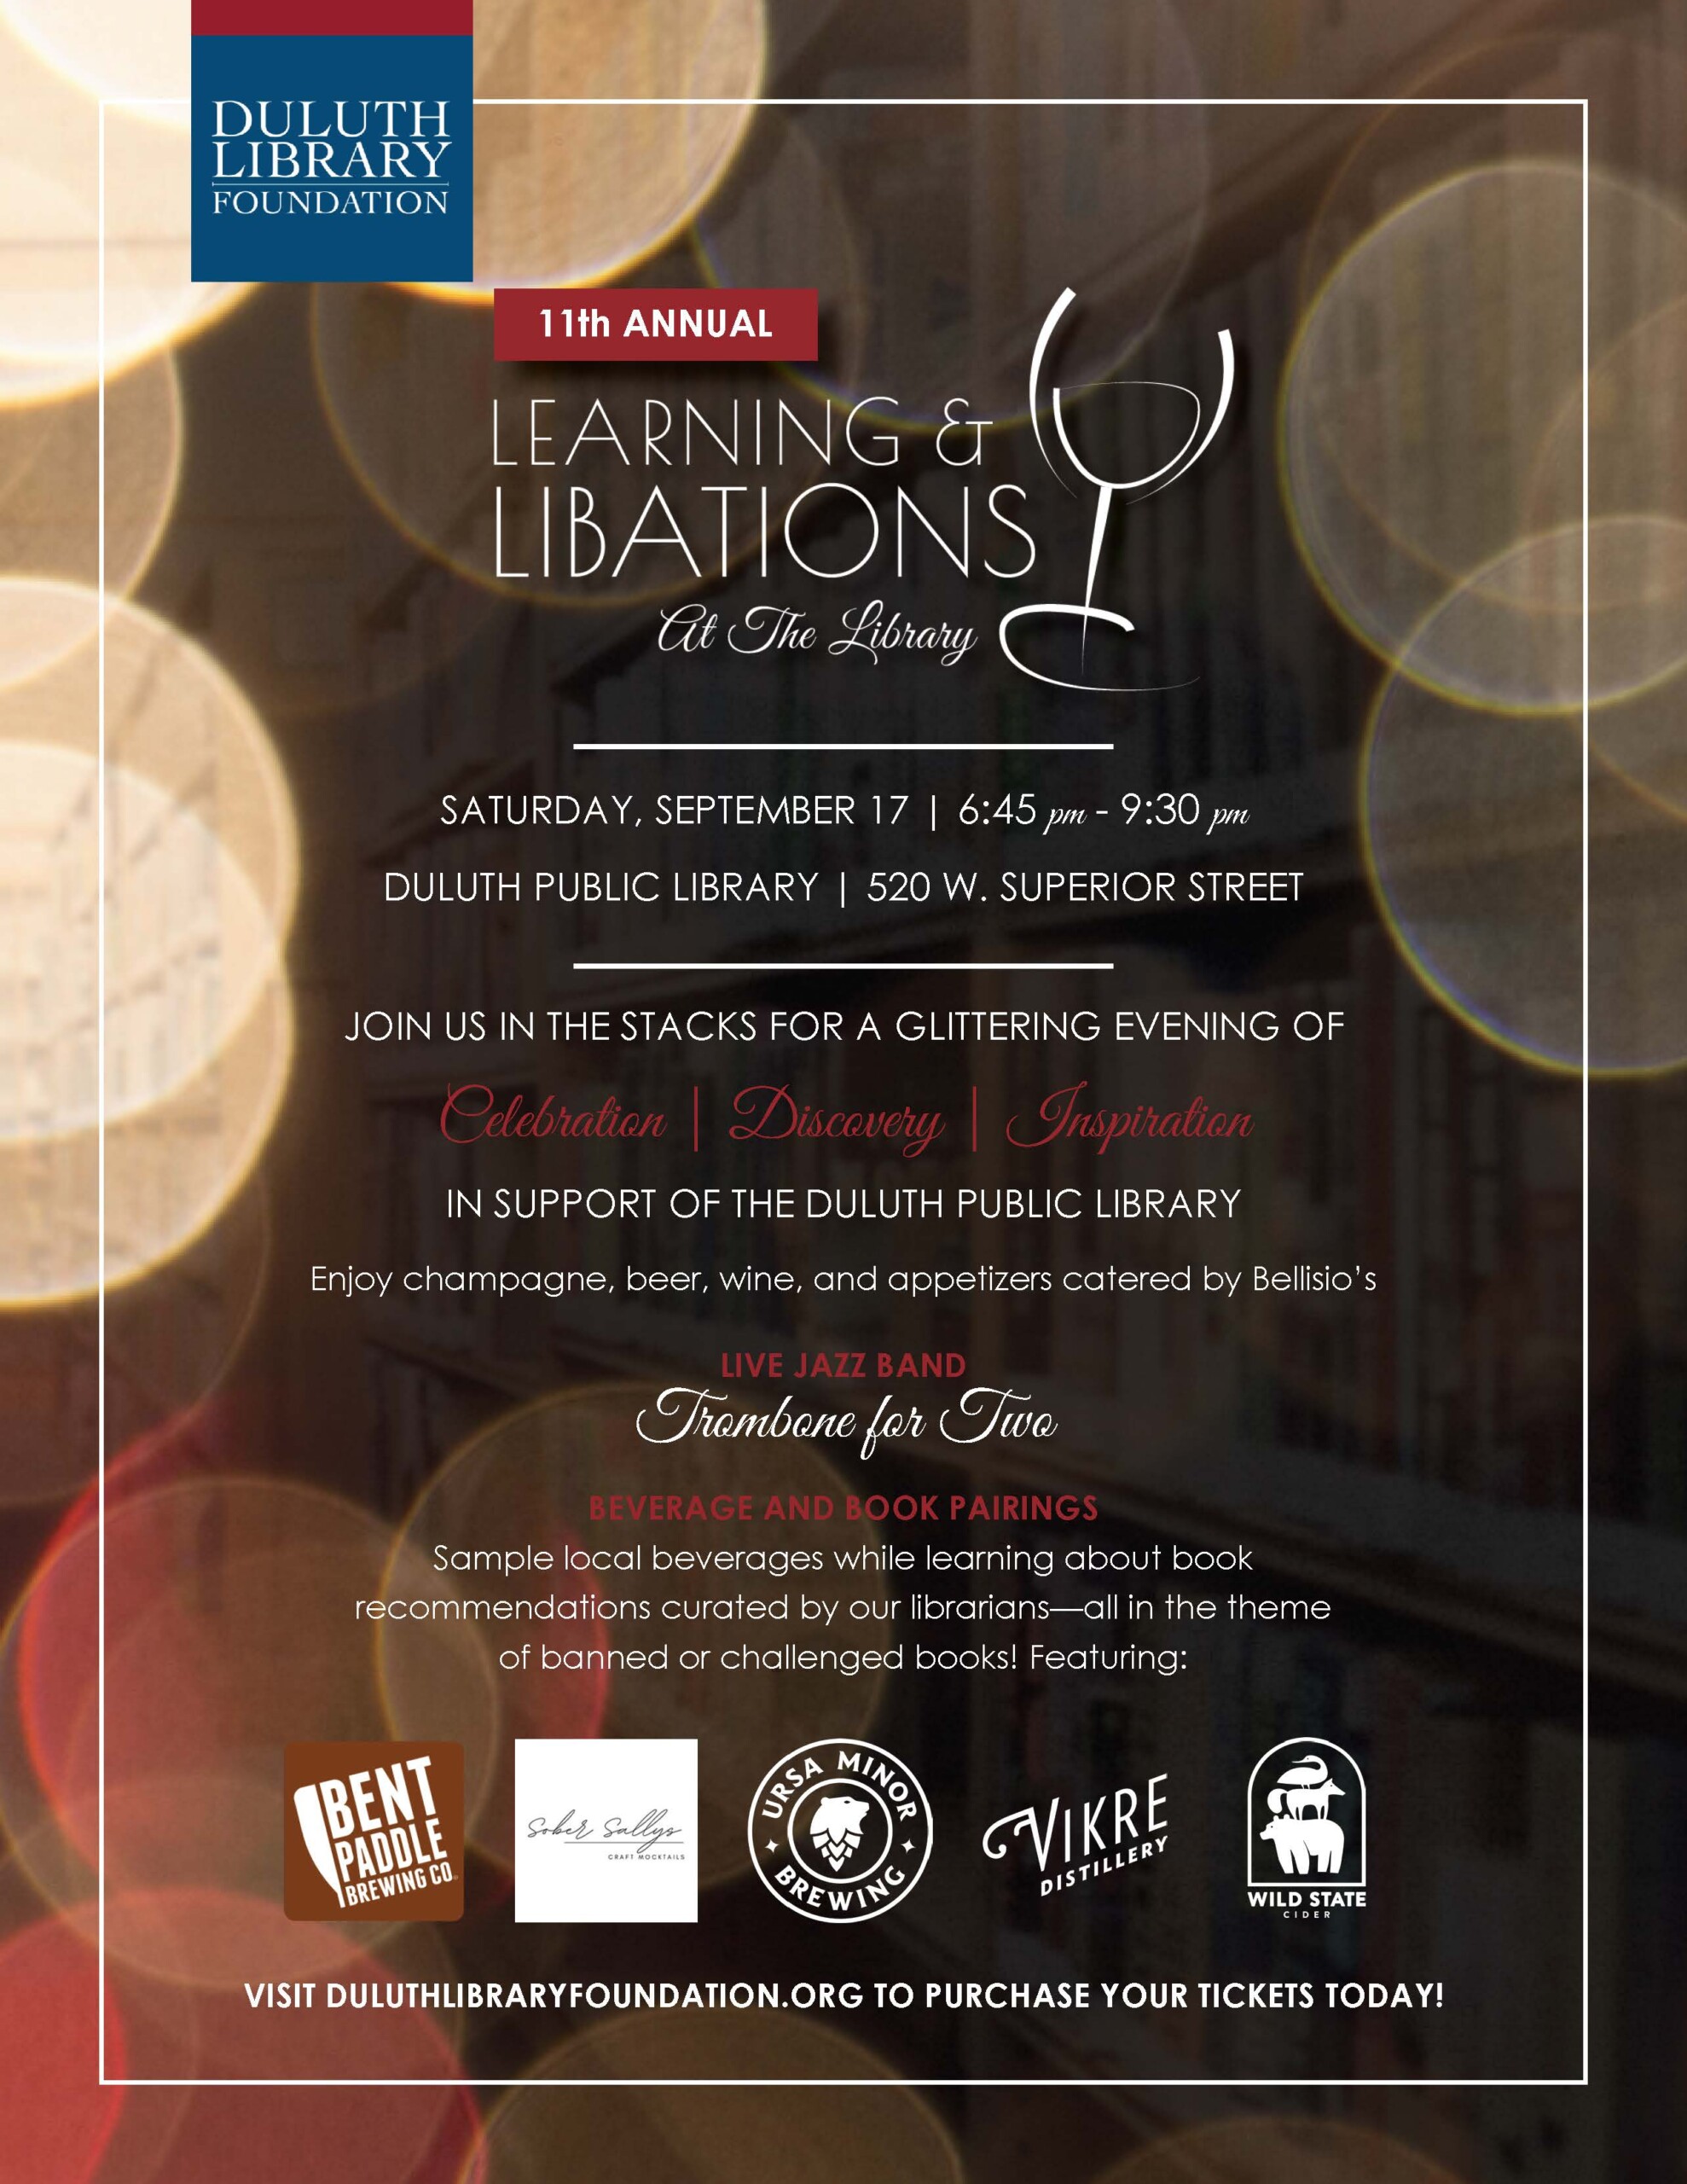 Duluth Library Foundation - Learning & Libations at the Library Poster